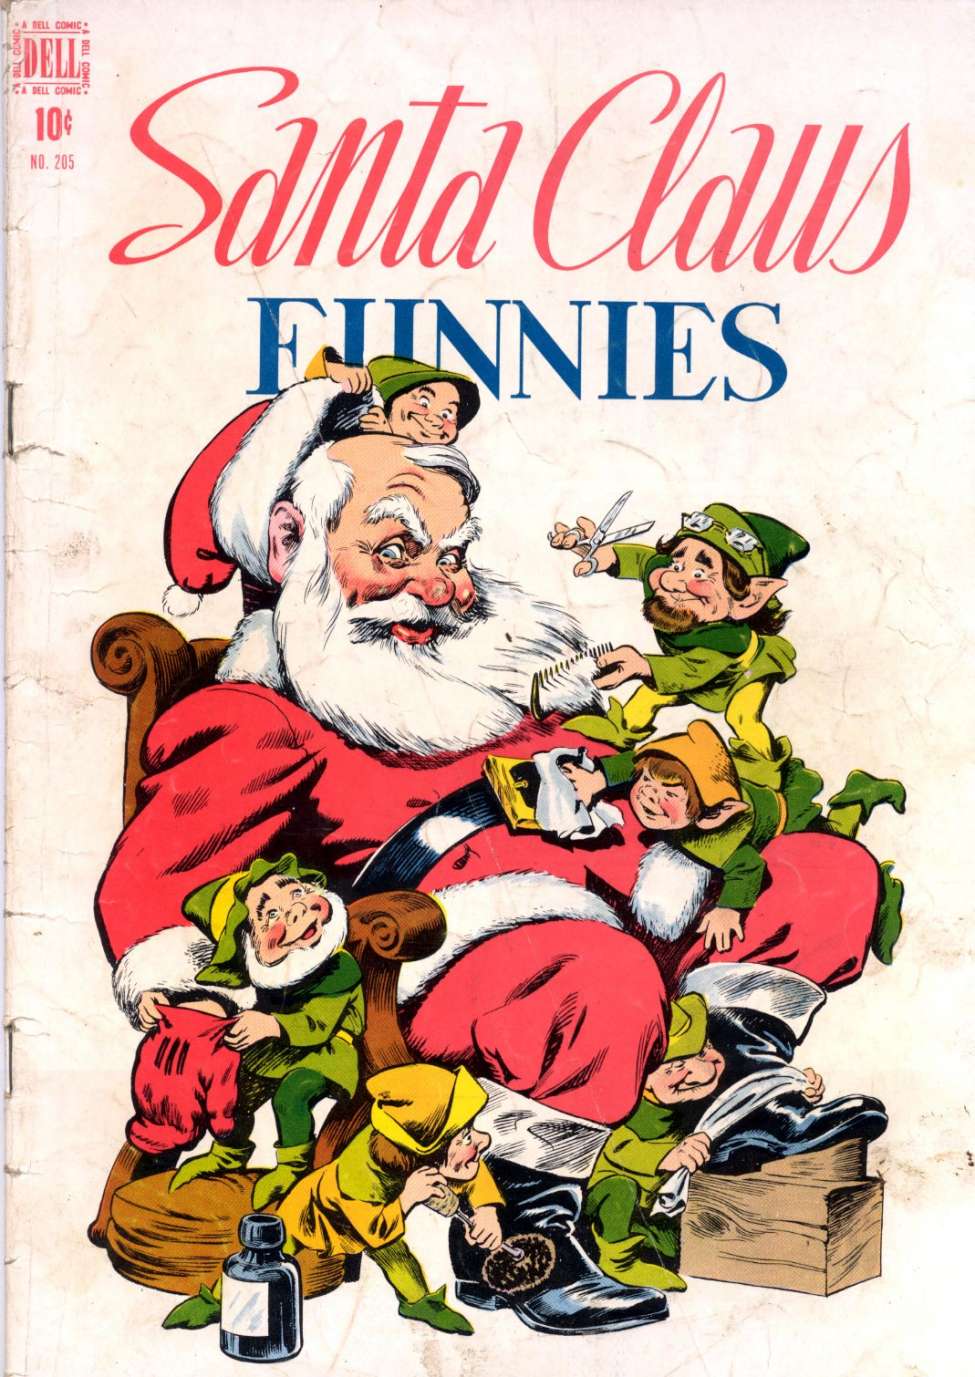 Book Cover For 0205 - Santa Claus Funnies